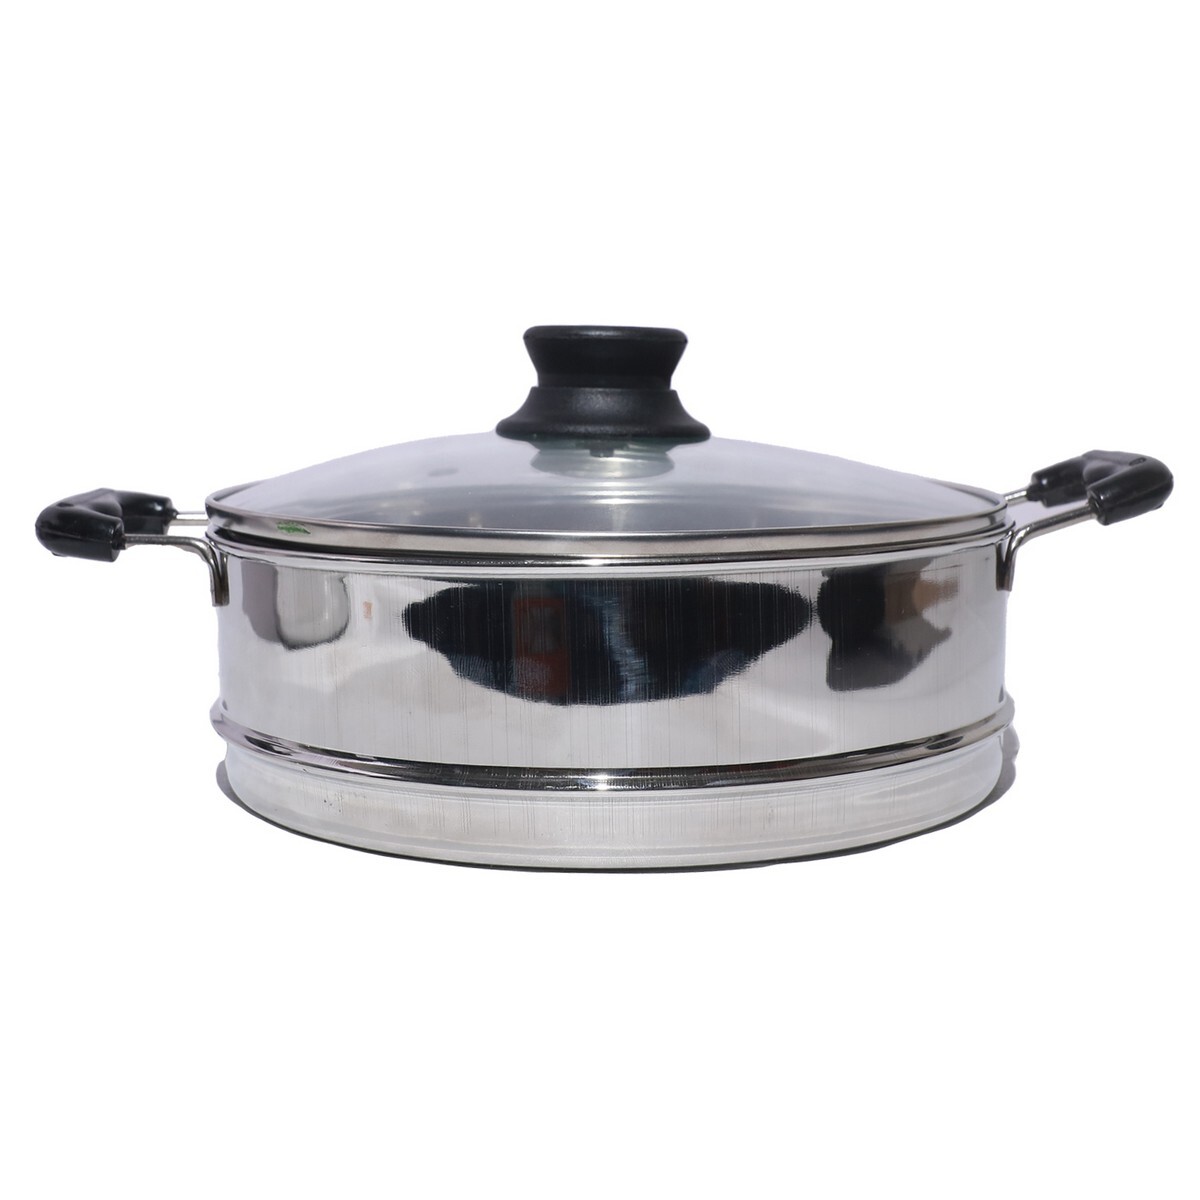 Chefline Cooker 5L & Steamer With Lid 2in1